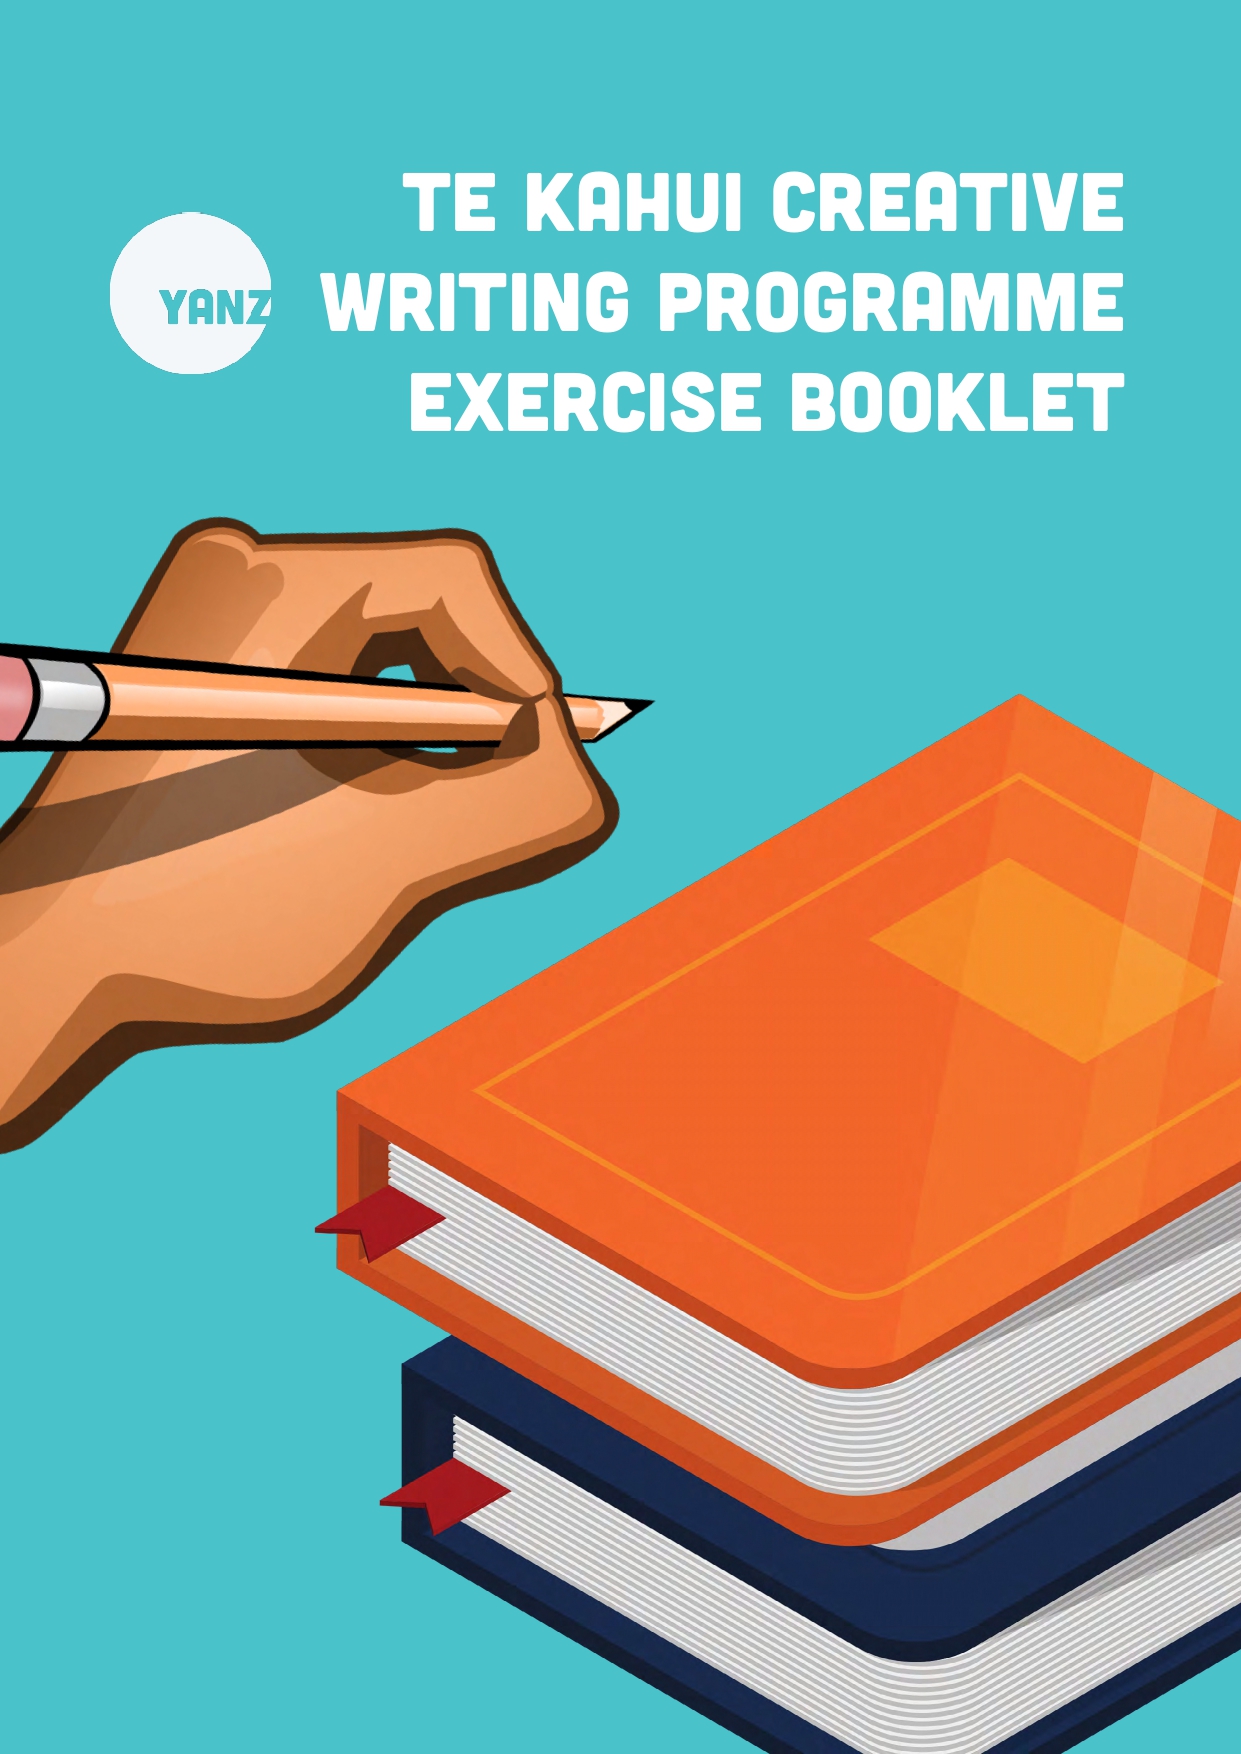 The cover of a Te Kahui creative writing exercise booklet